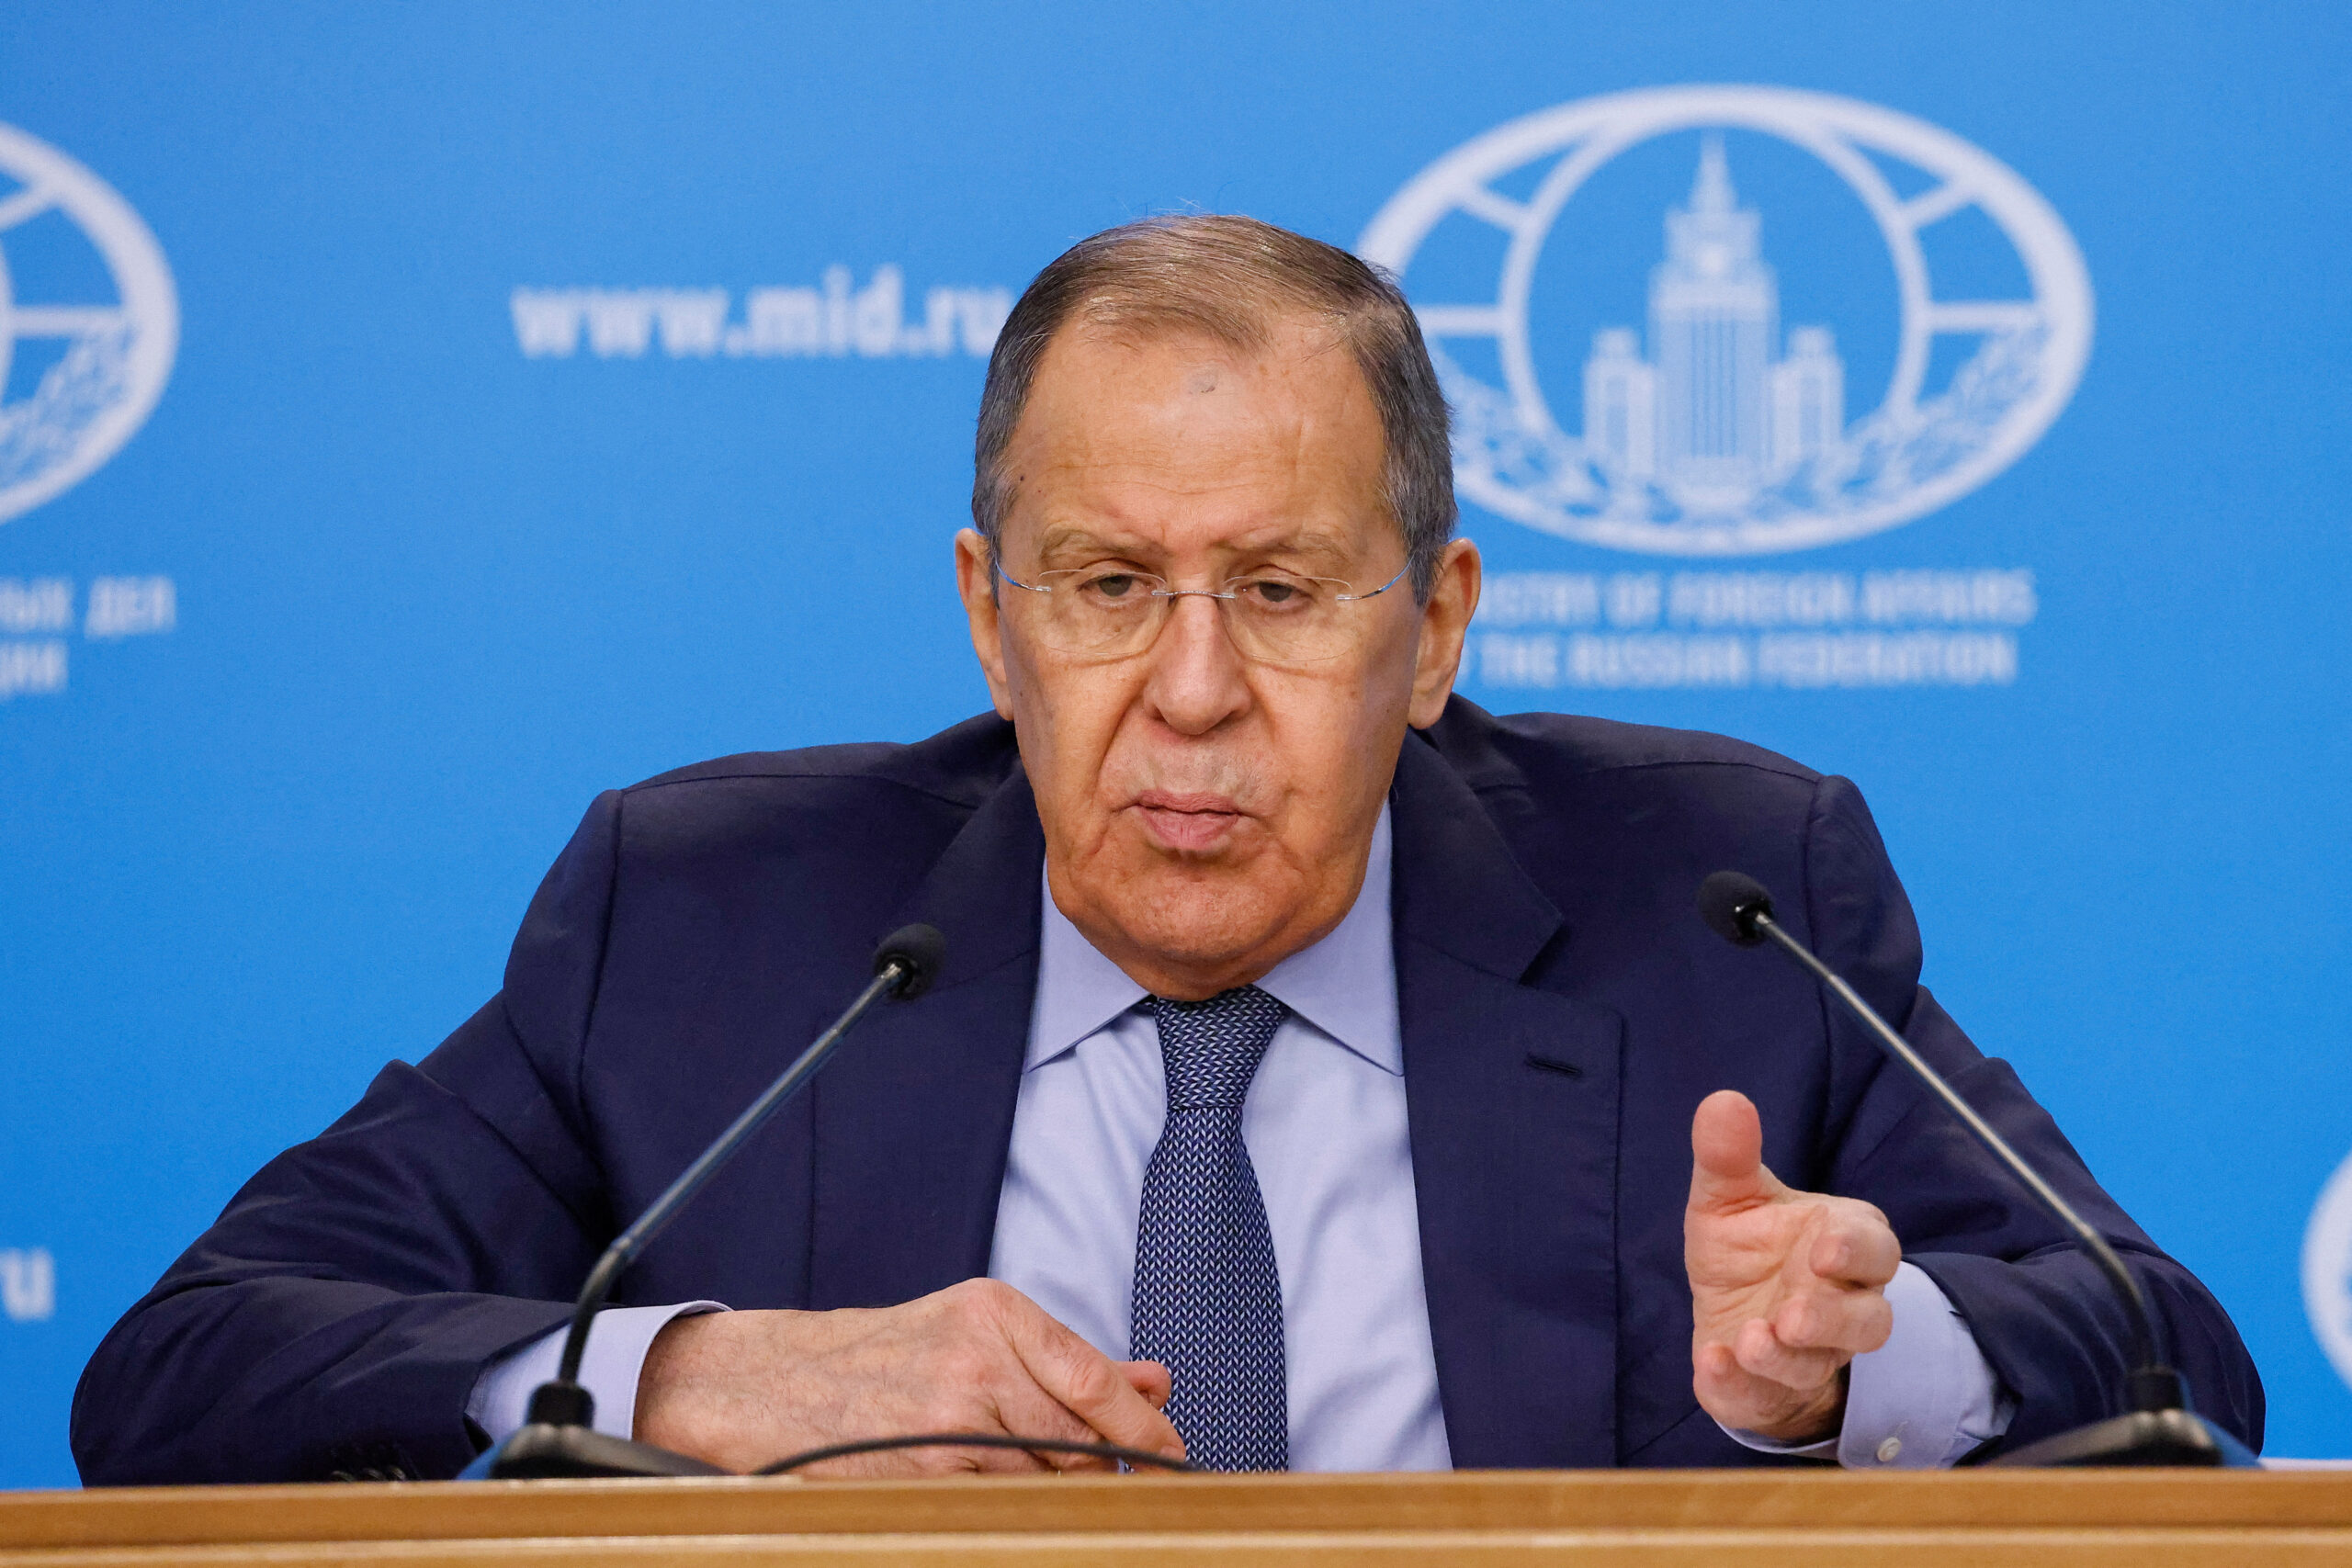 2024 01 18T094725Z 1 LYNXMPEK0H0AT RTROPTP 4 RUSSIA LAVROV scaled